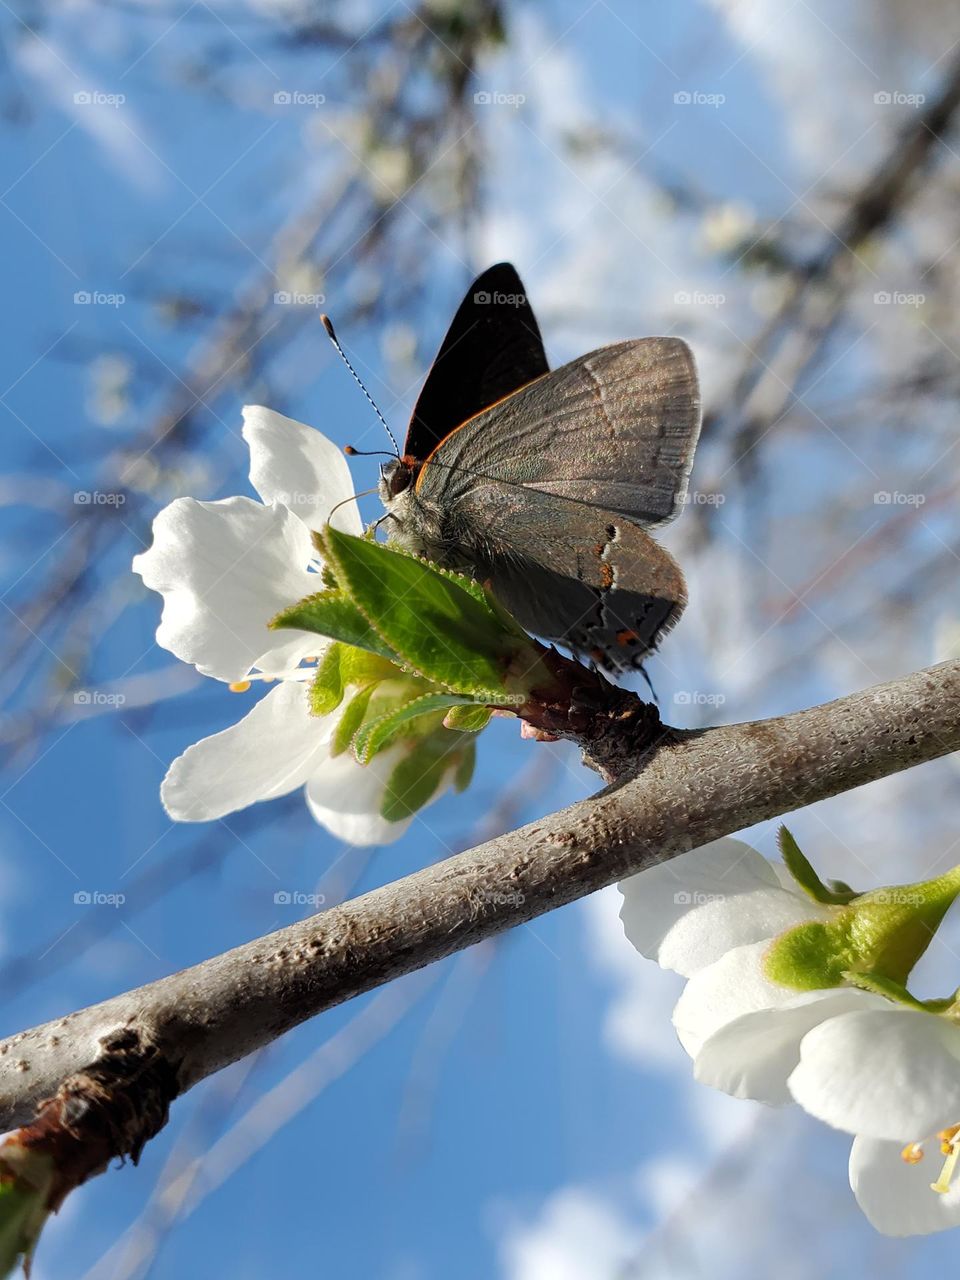 First signs of Spring.  A gray hairstreak butterfly pollinating white plum tree flowers.